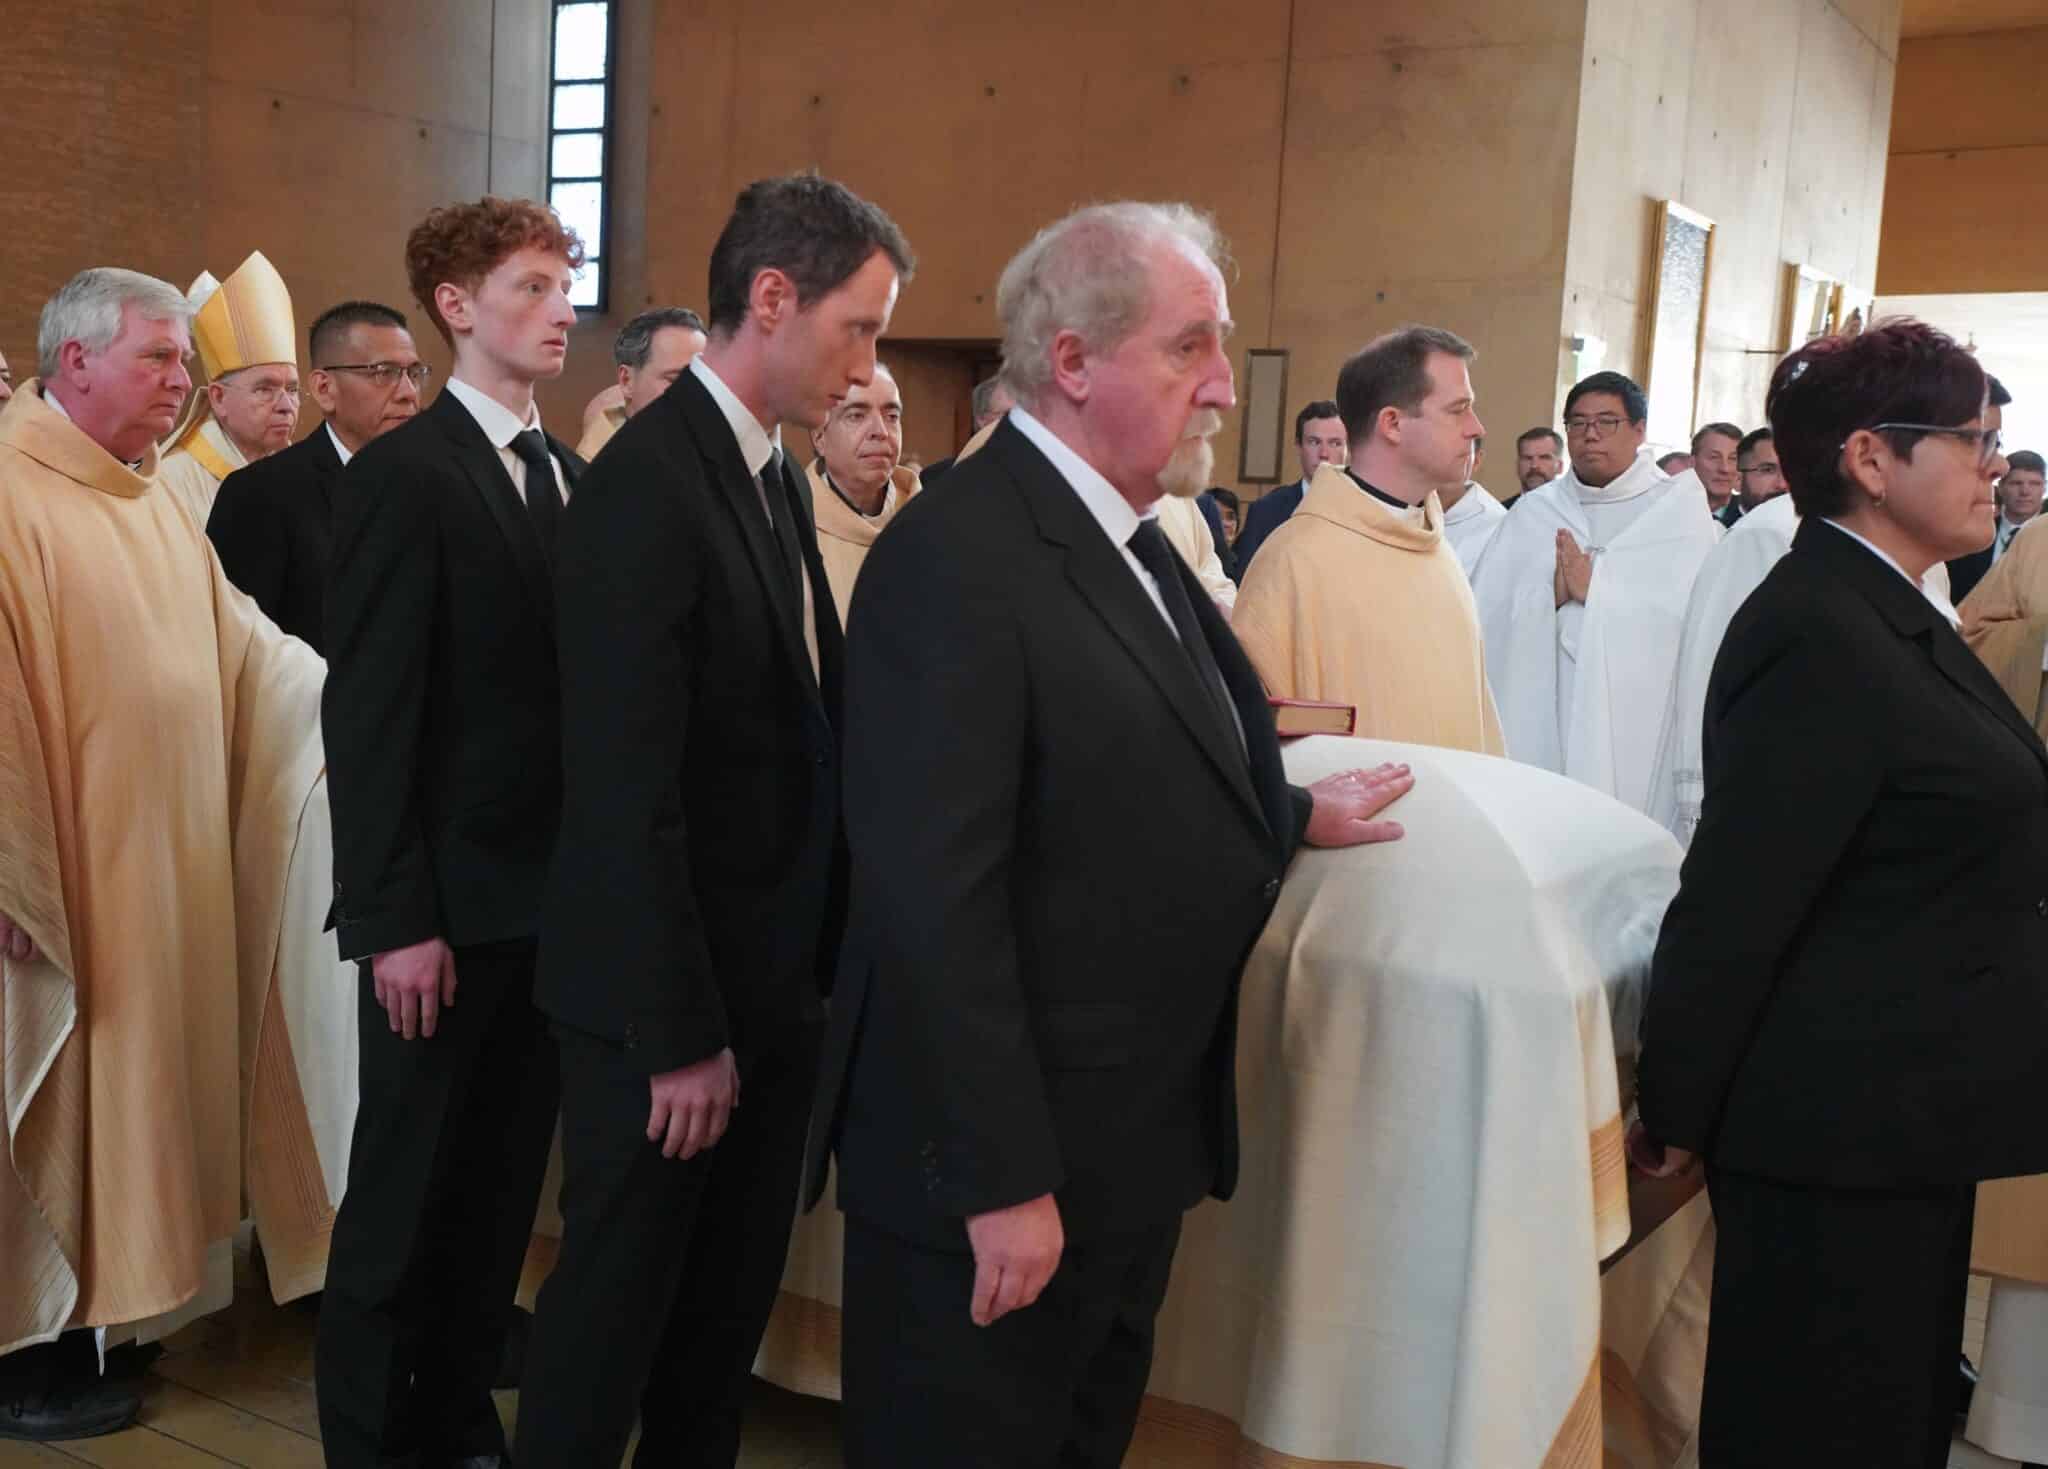 Thousands Gather At Funeral Mass For La’s Bishop O’connell Recalled As